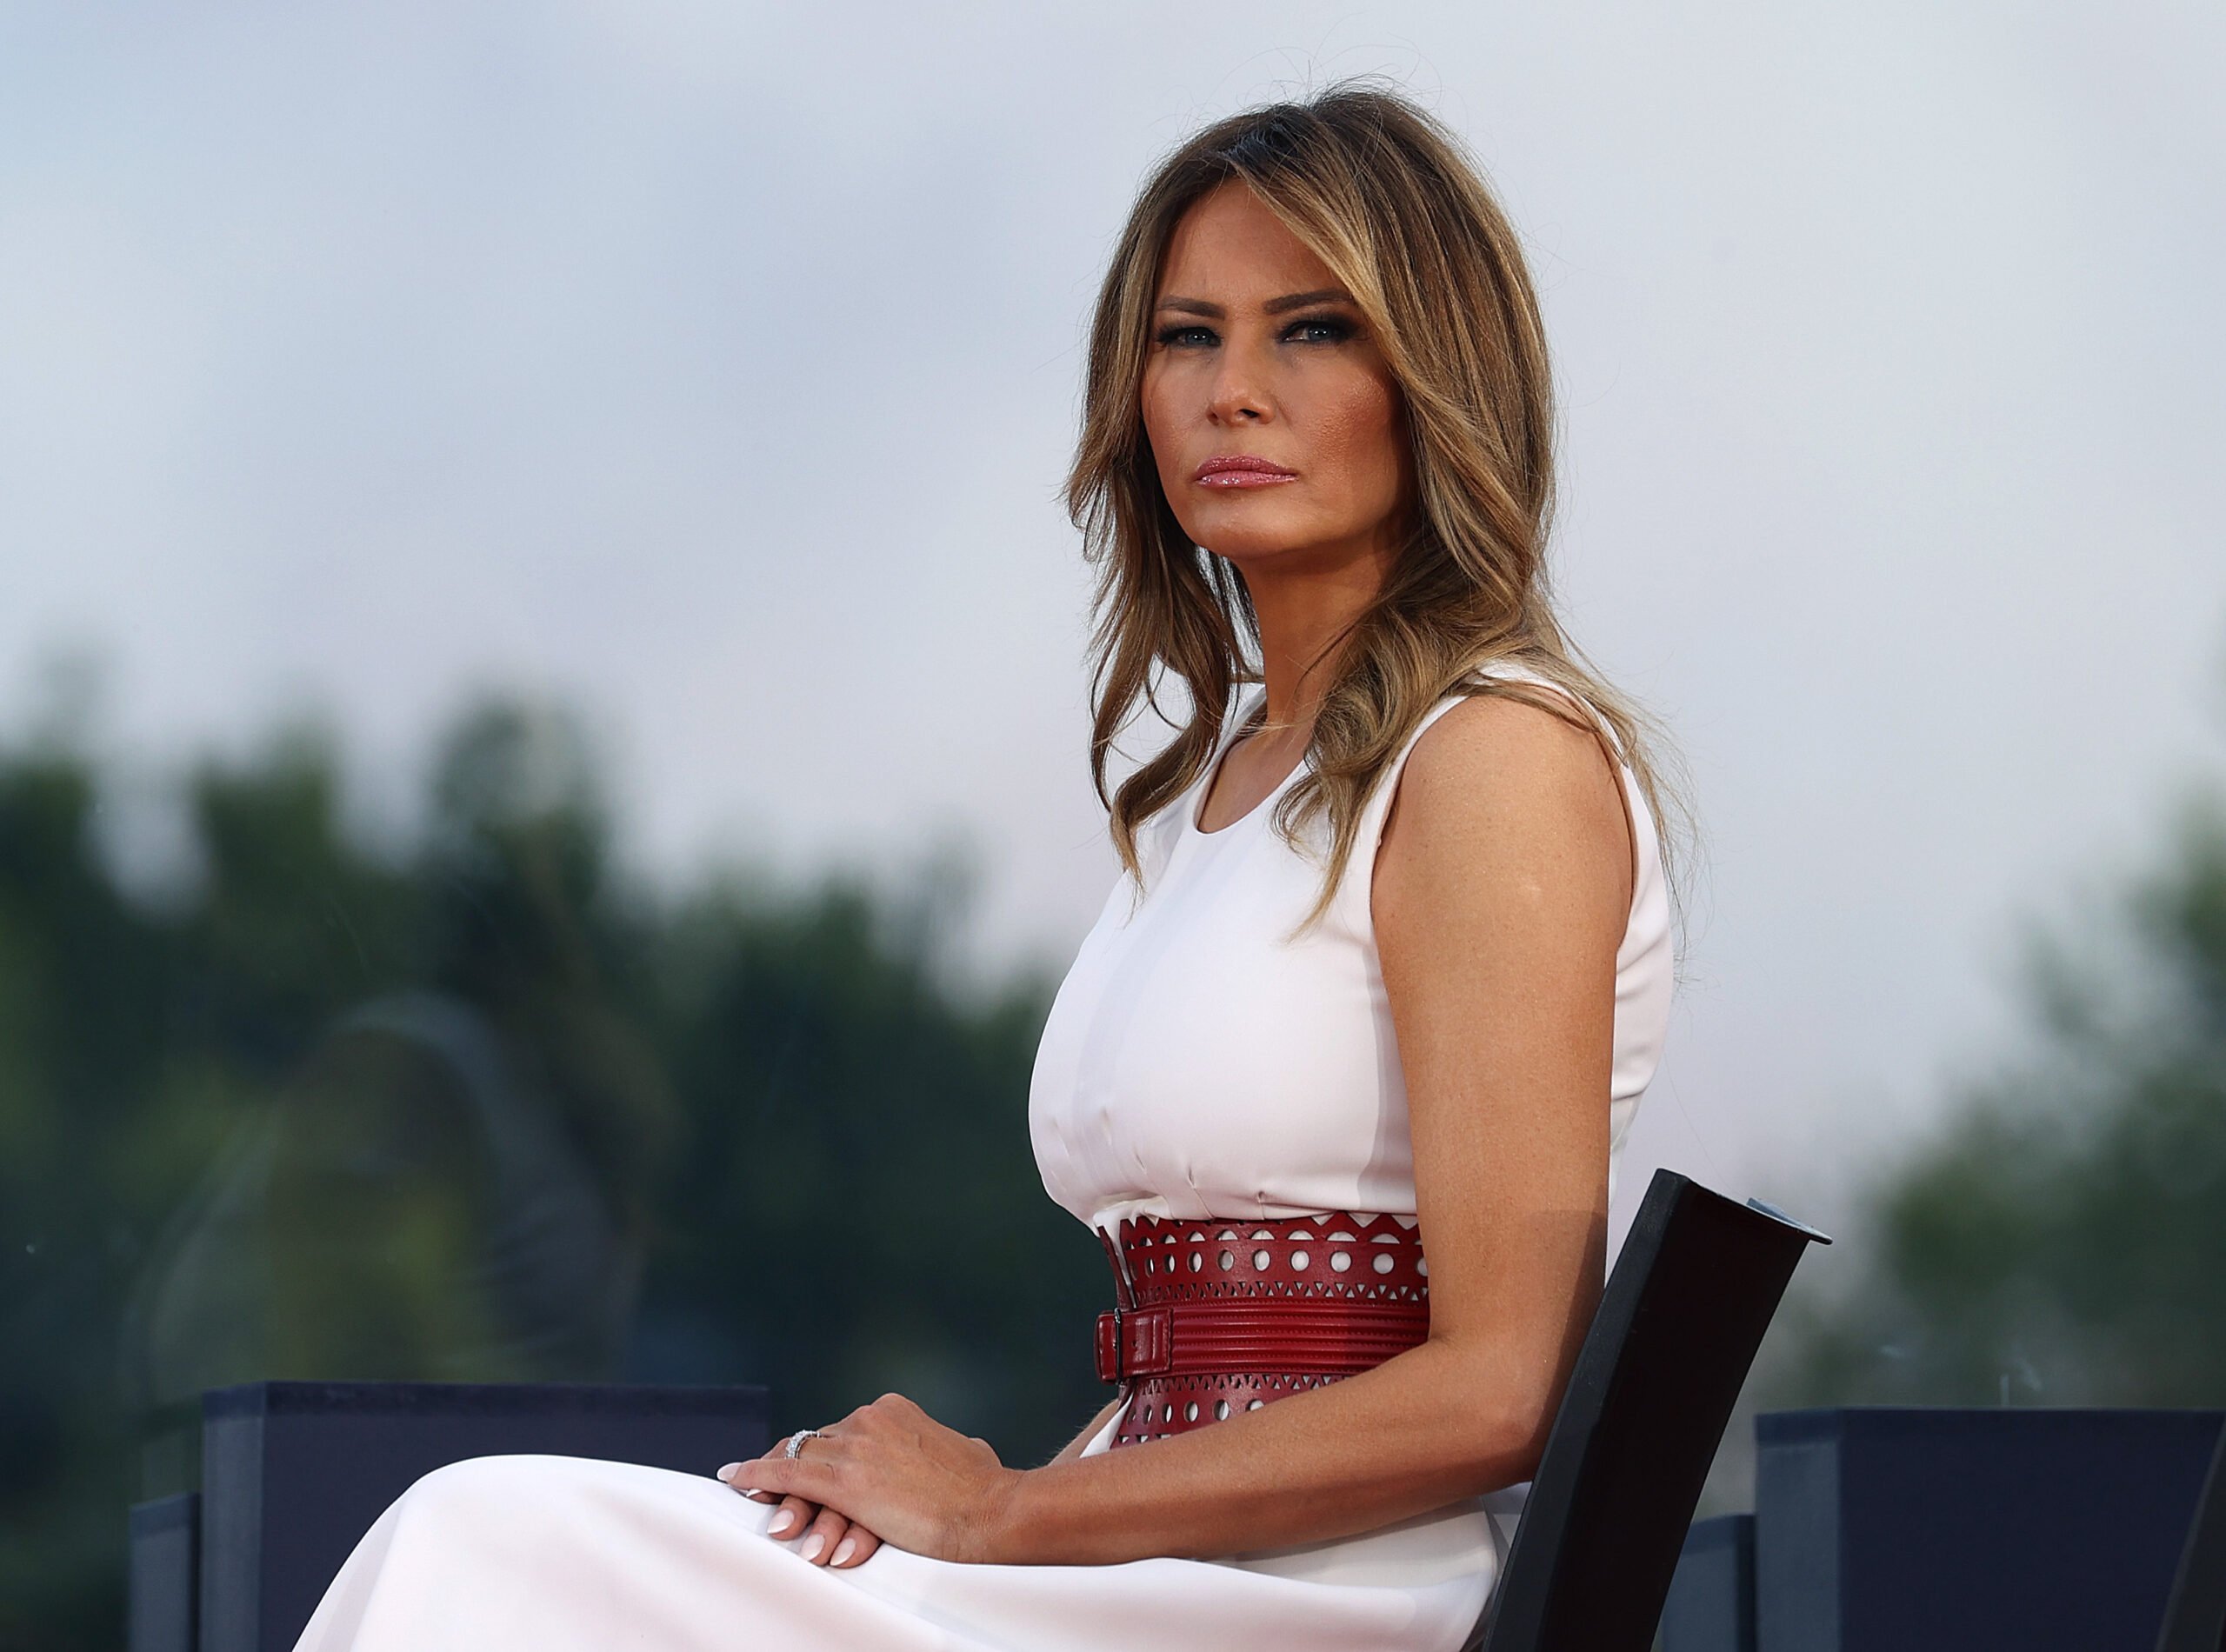 WASHINGTON, DC - JULY 04: First Lady Melania Trump attends an event on the South Lawn of the White House on July 04, 2020 in Washington, DC. President Trump is hosting a "Salute to America" celebration that includes flyovers by military aircraft and a large fireworks display. (Photo by Tasos Katopodis/Getty Images)